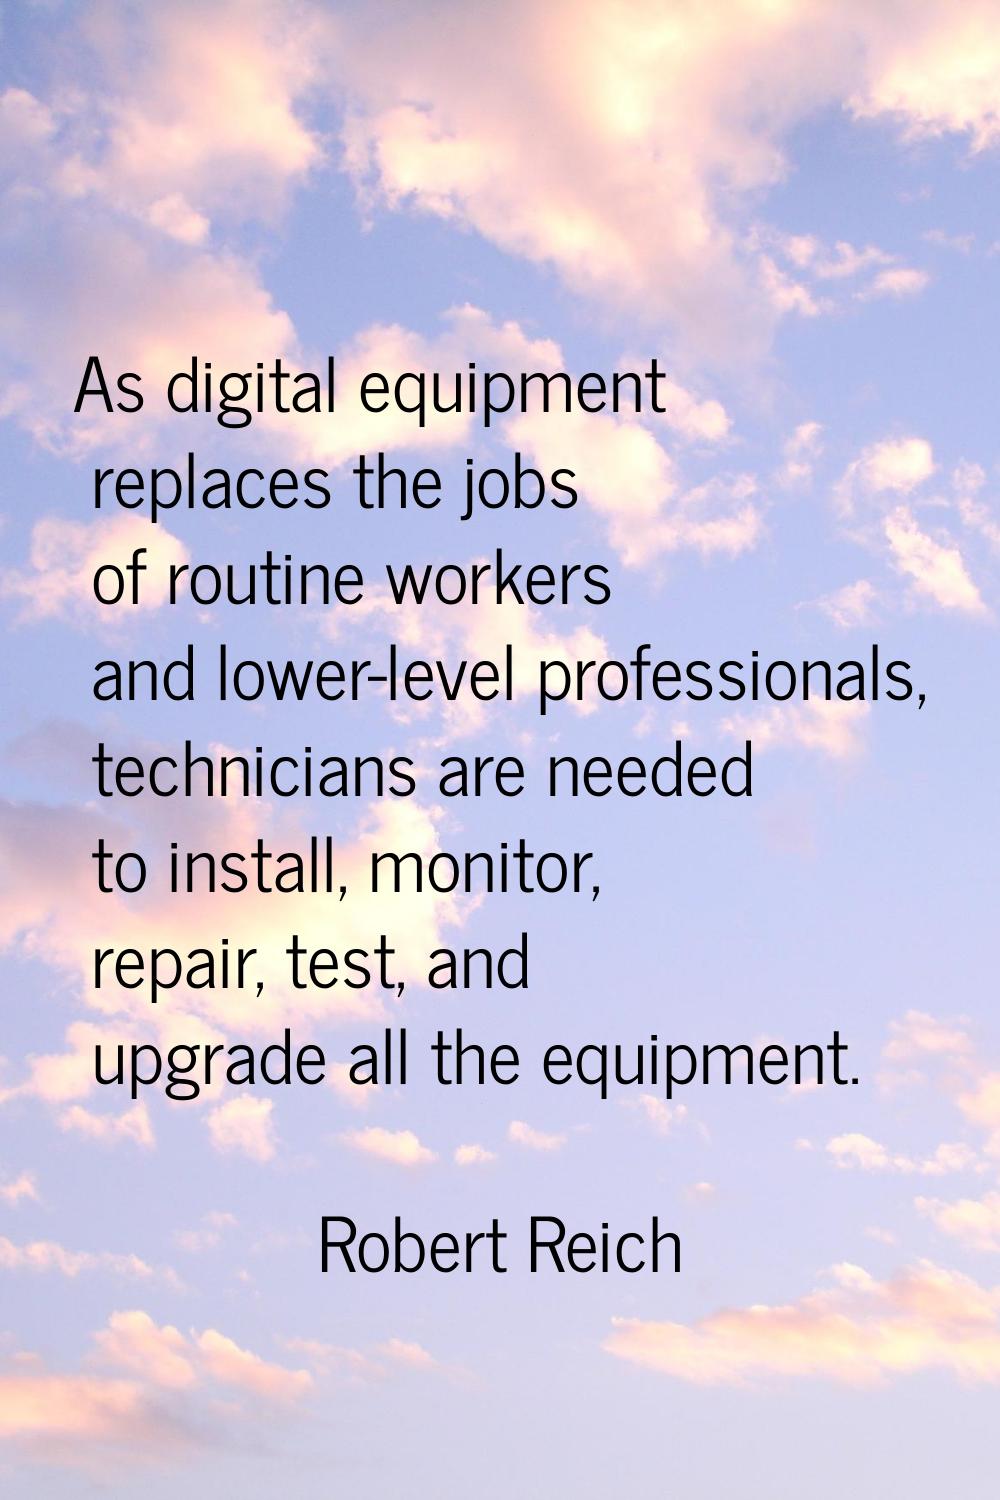 As digital equipment replaces the jobs of routine workers and lower-level professionals, technician